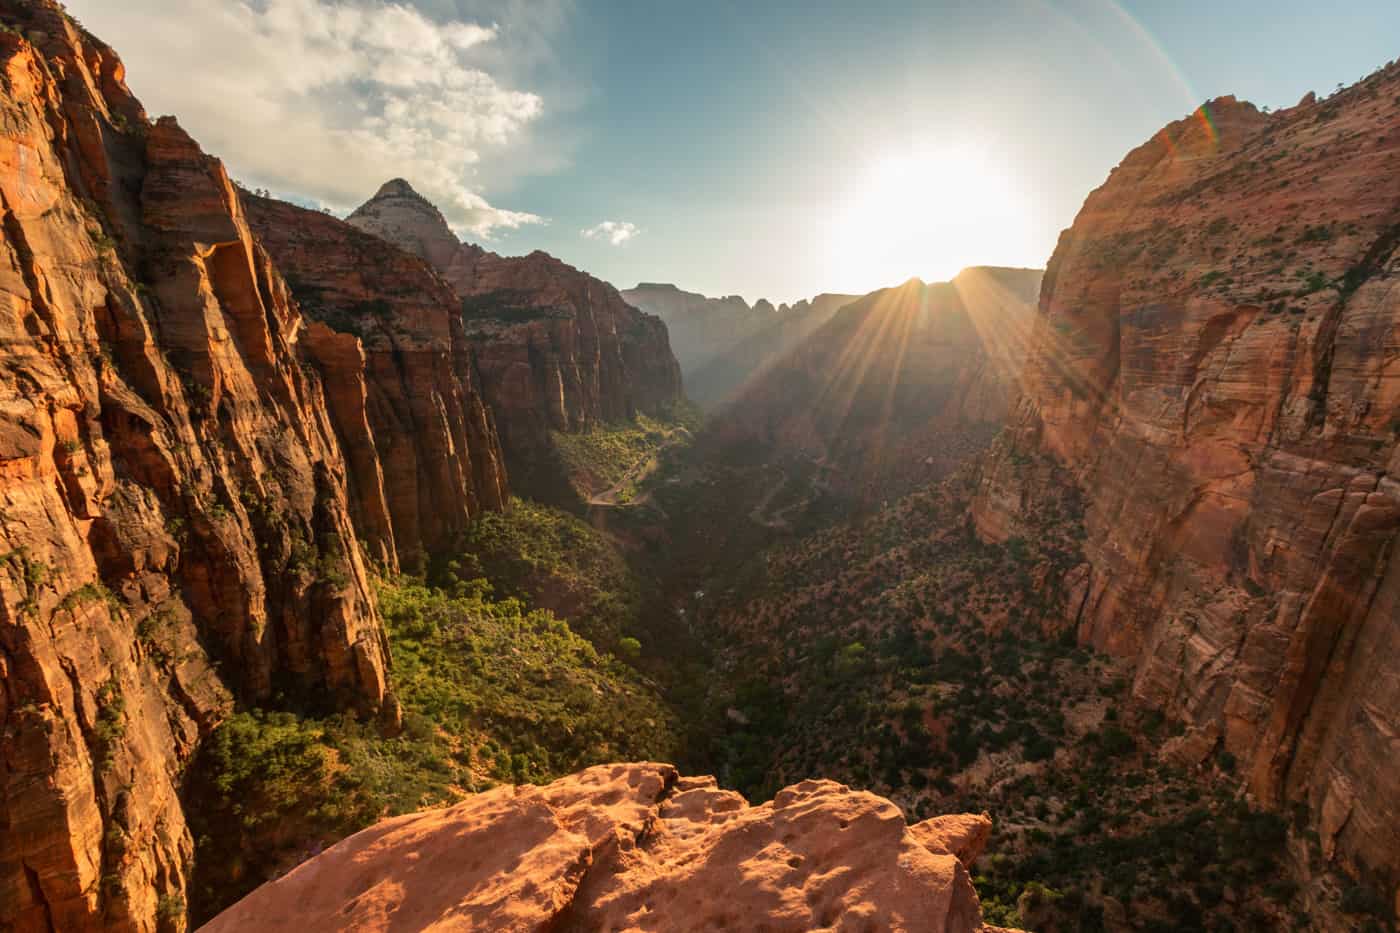 How to Plan a Trip to Zion National Park